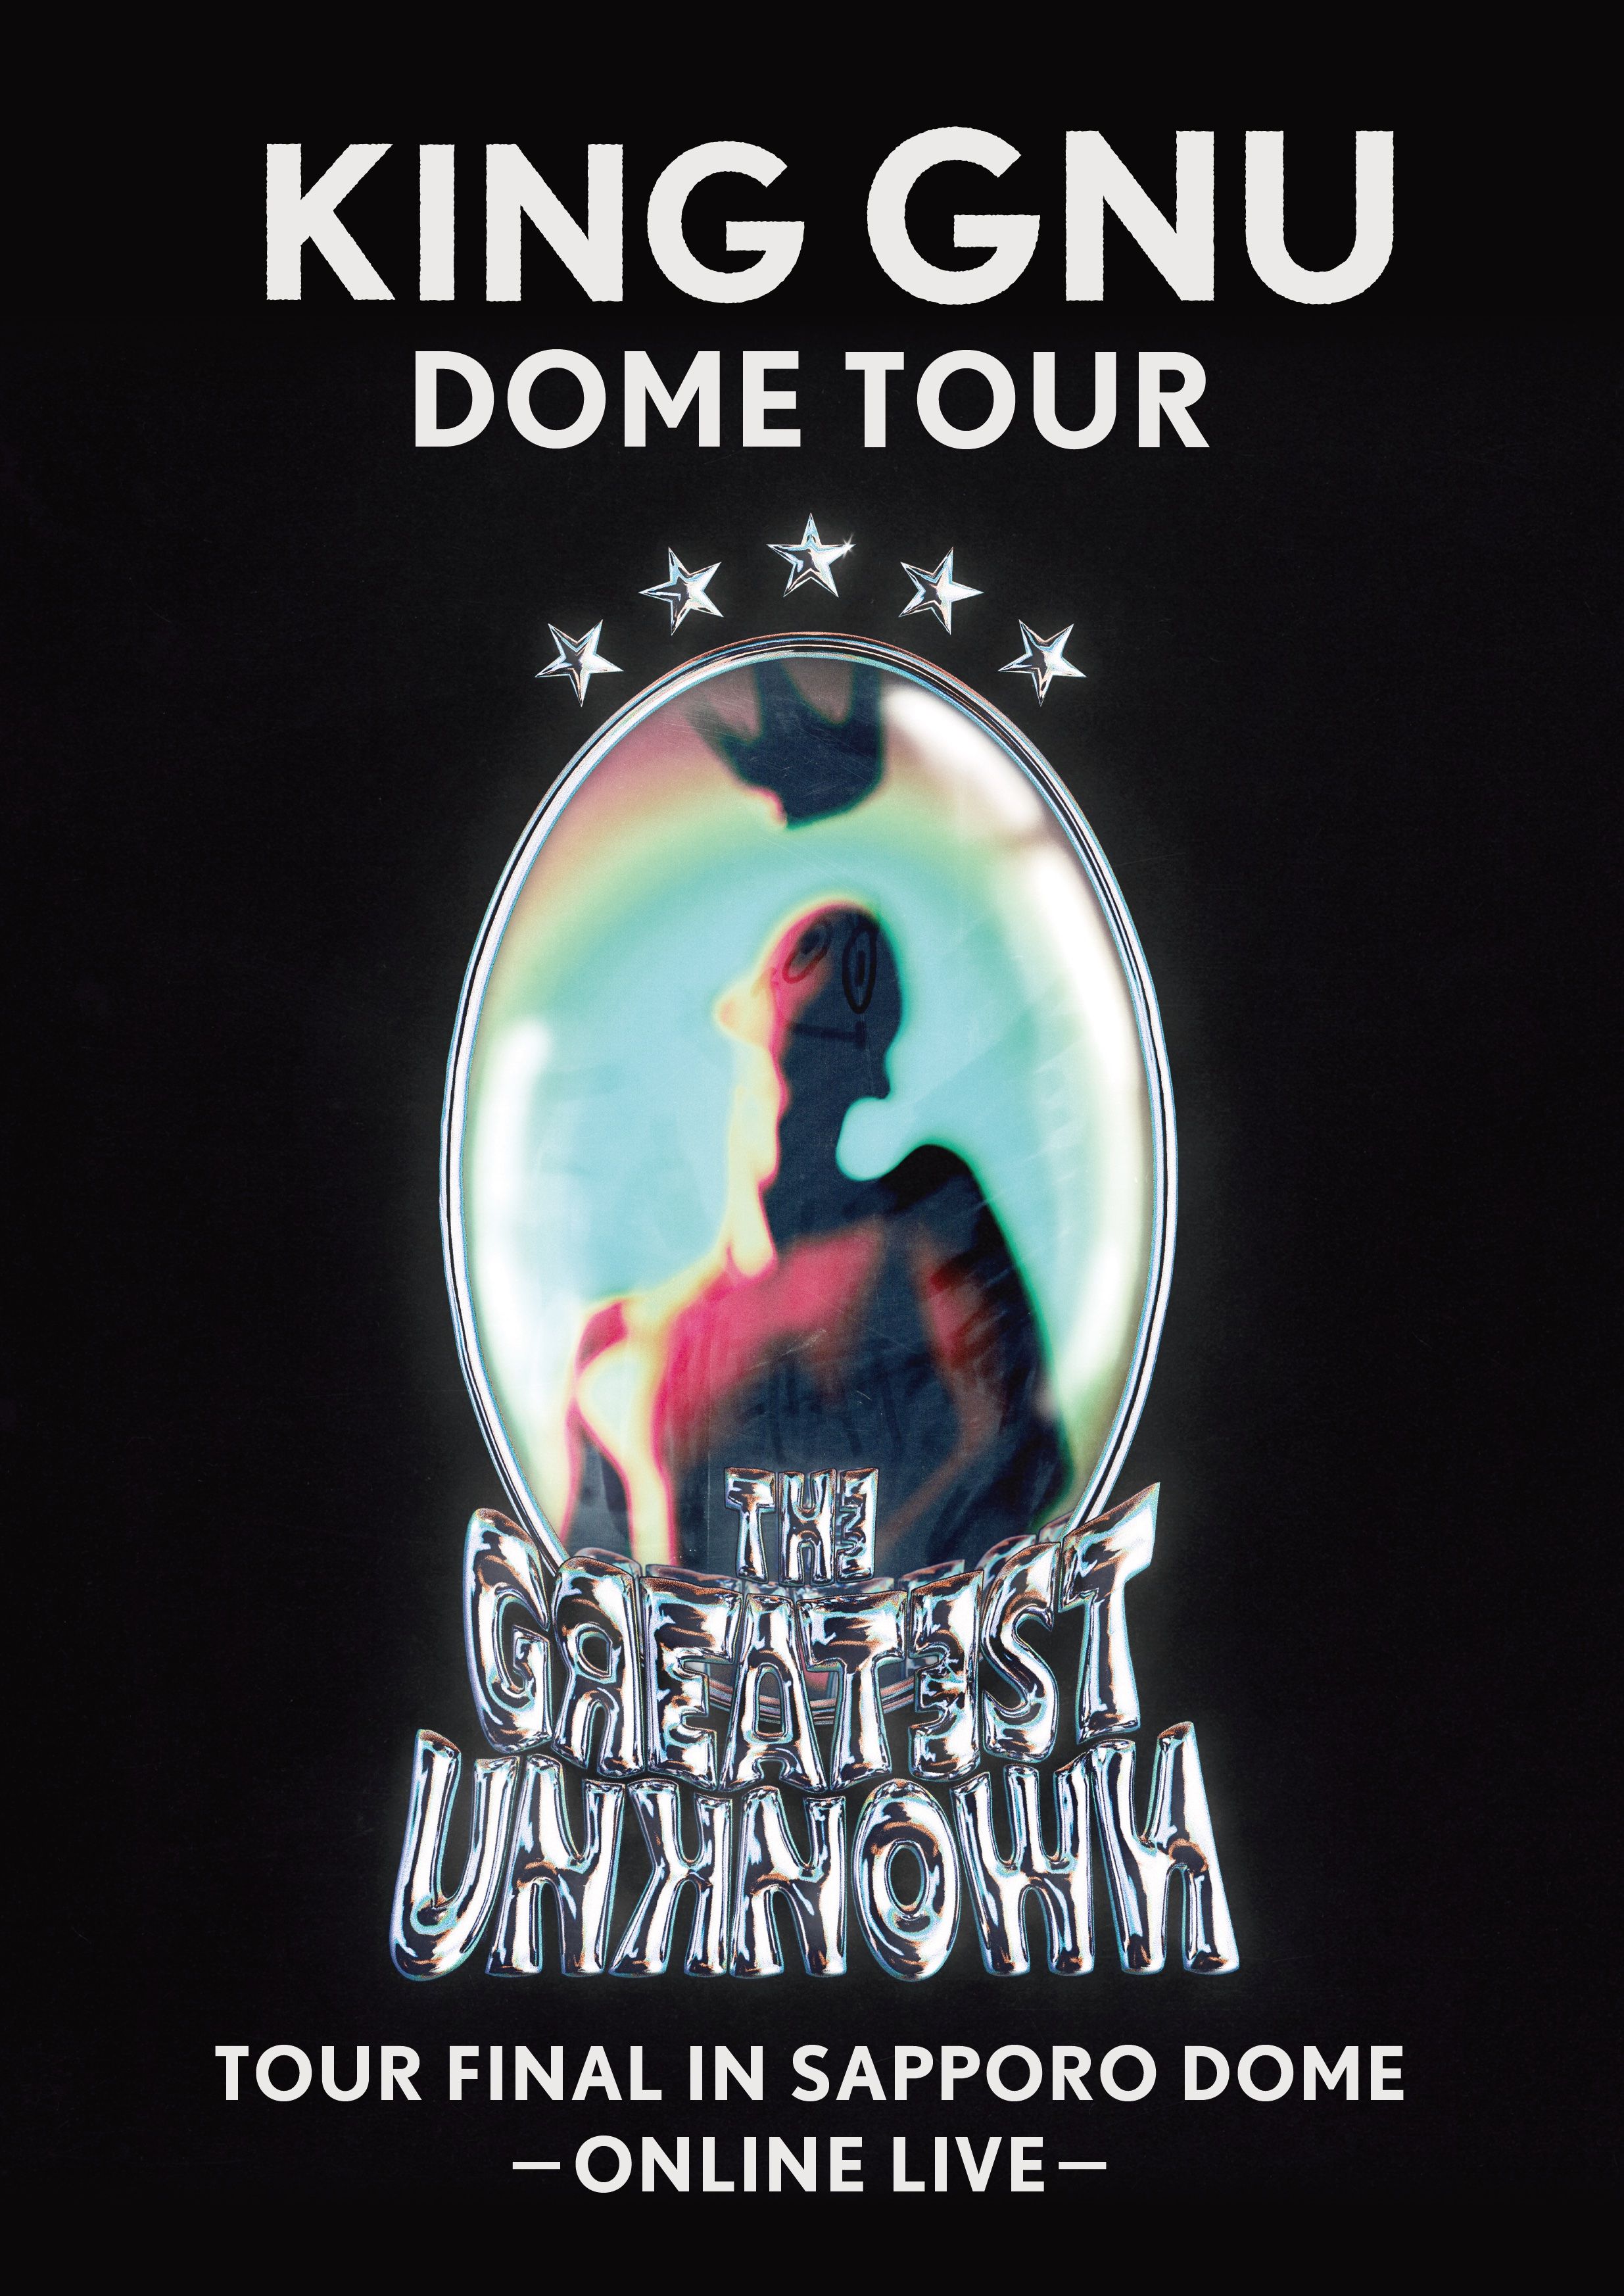 King Gnu Dome Tour「THE GREATEST UNKNOWN」 TOUR FINAL in Sapporo 